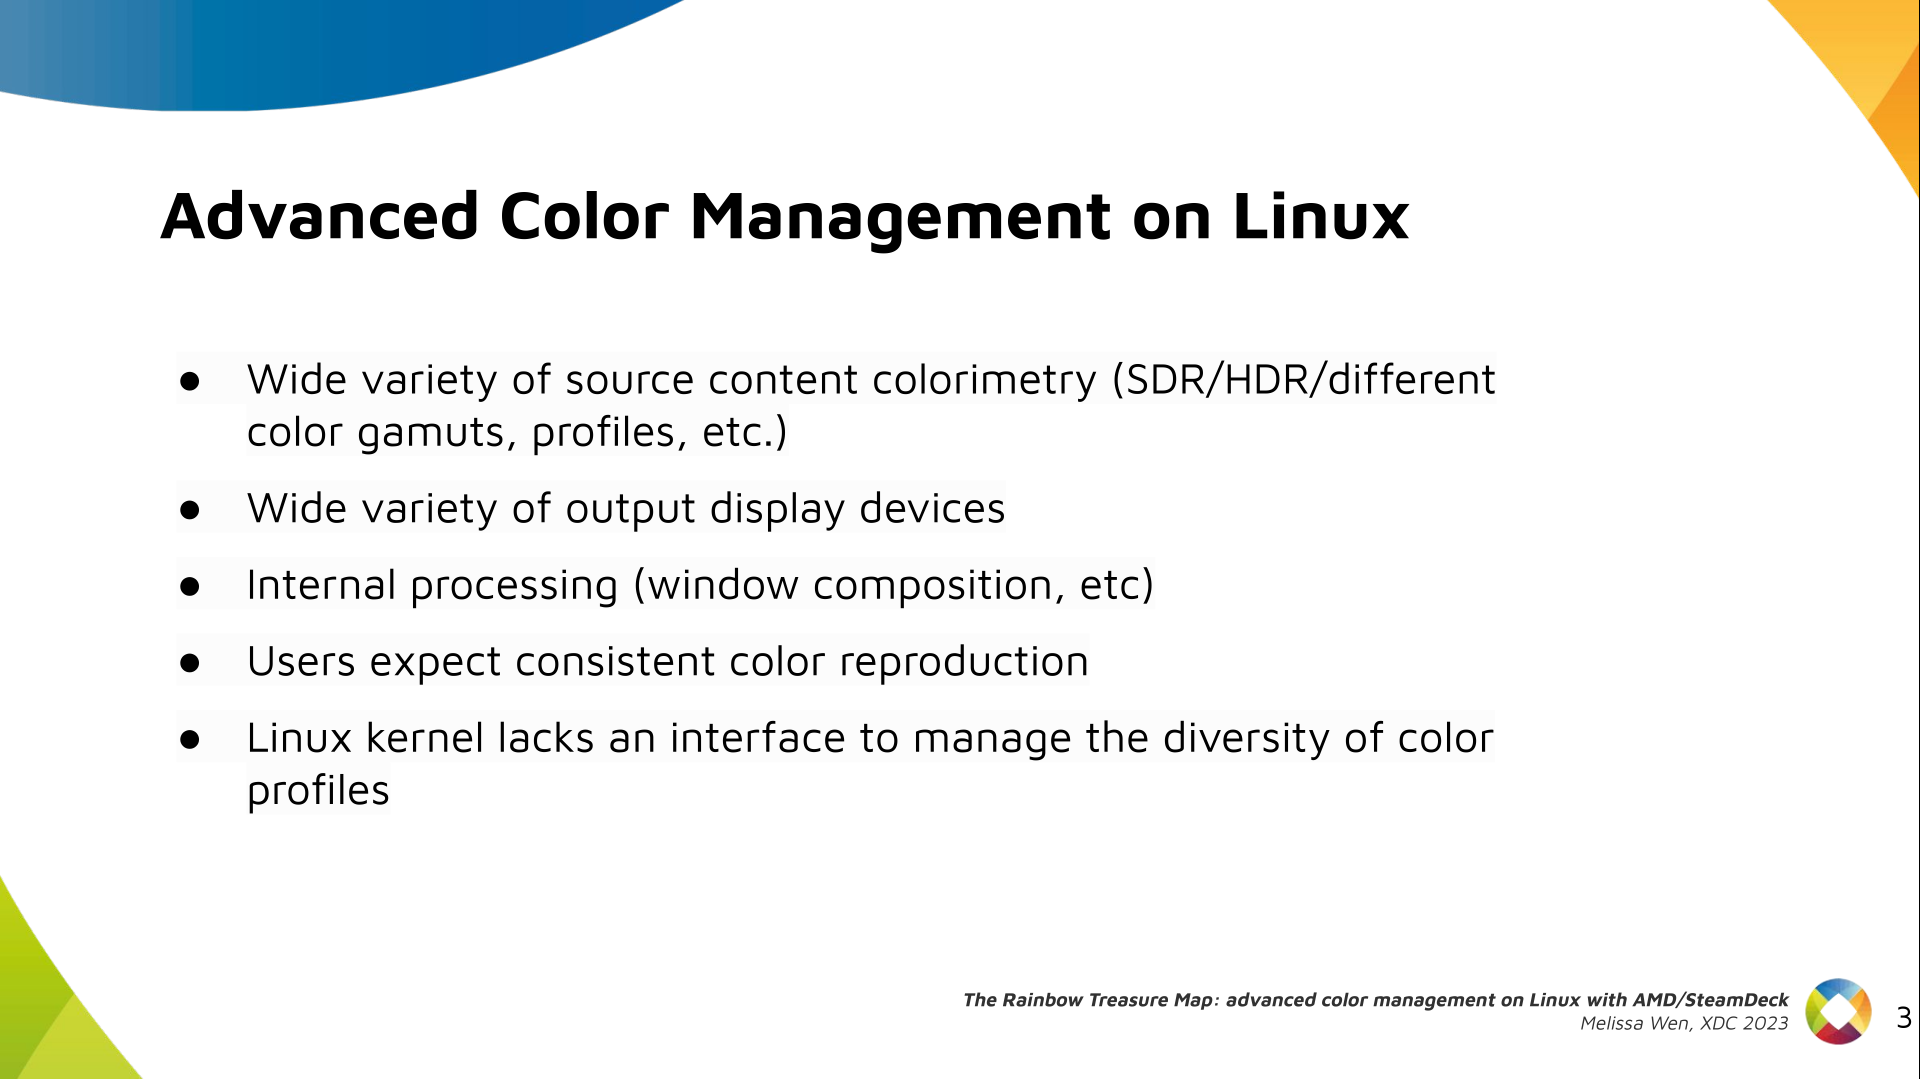 Slide 3: Why do we need advanced color management on Linux?